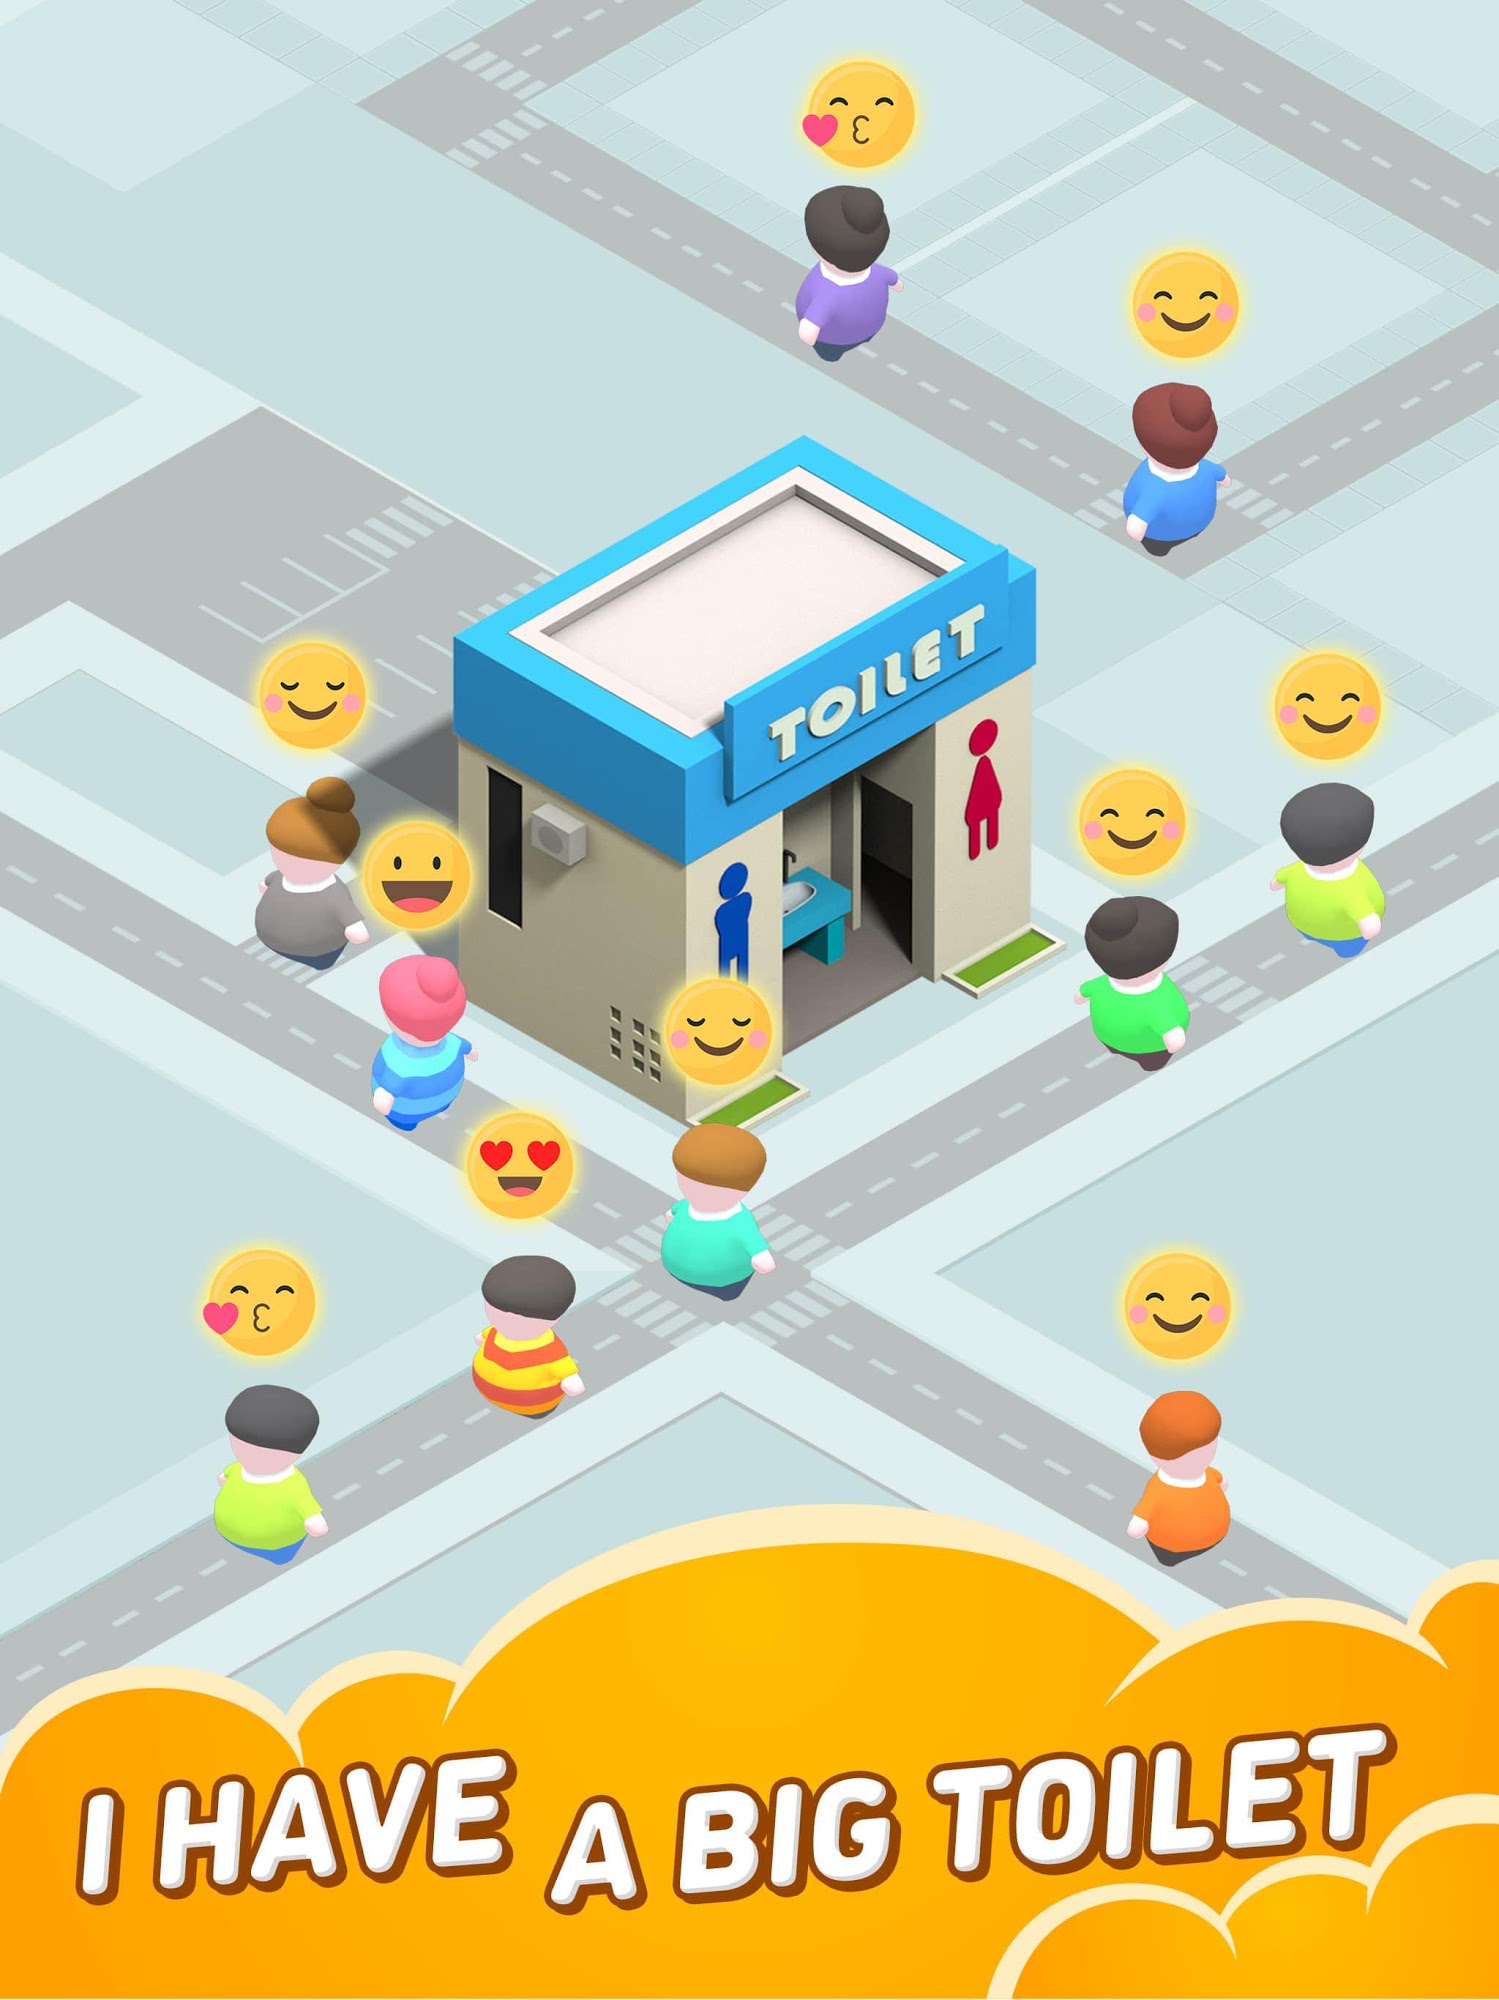 Idle Shopping Mall for Android